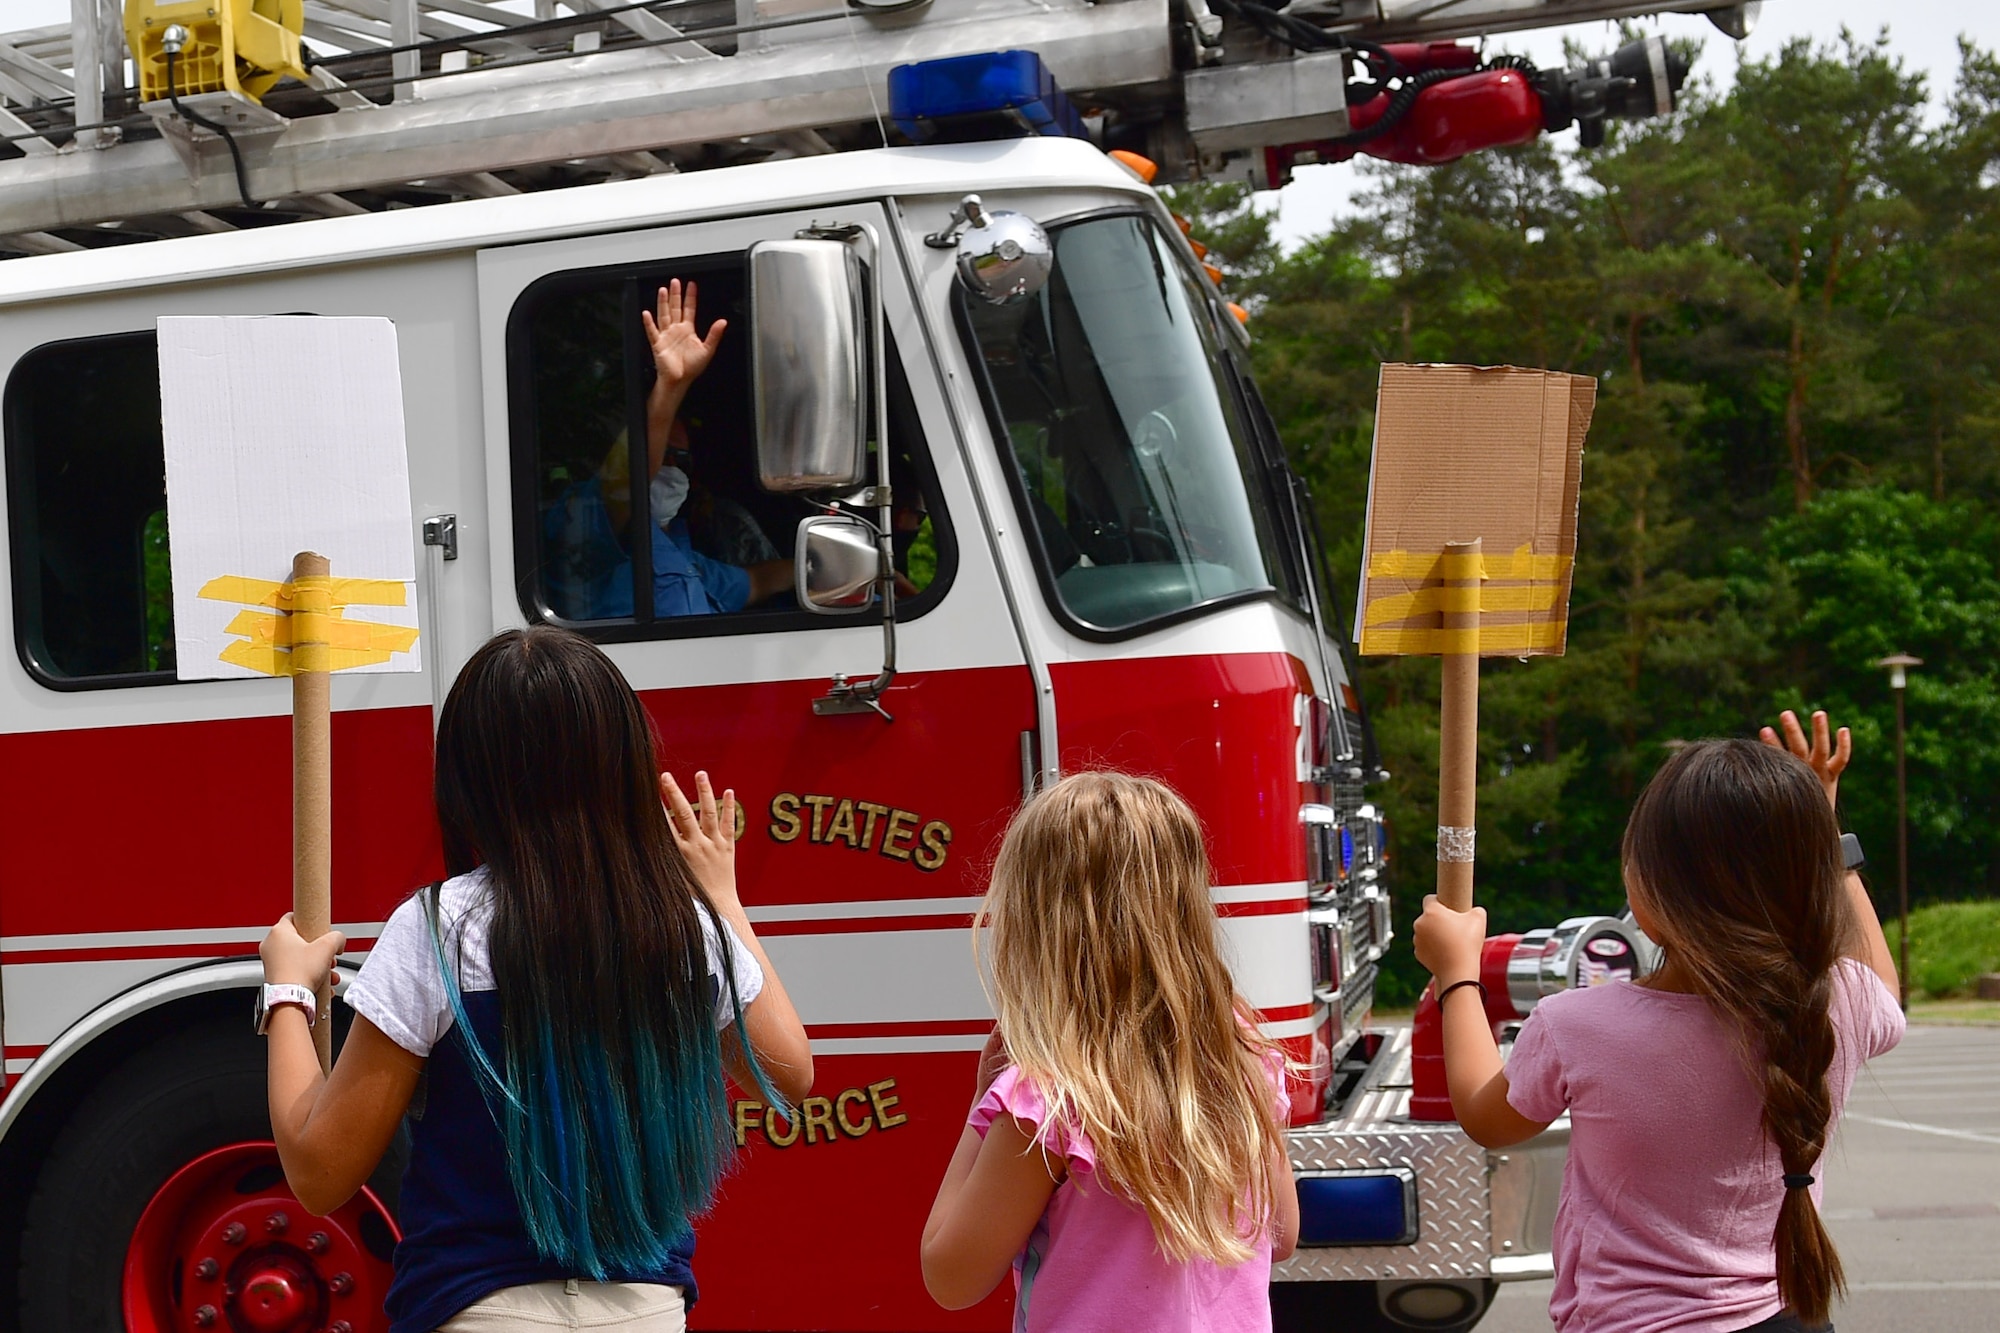 Three children hold signs and wave to first responders in a passing fire truck.